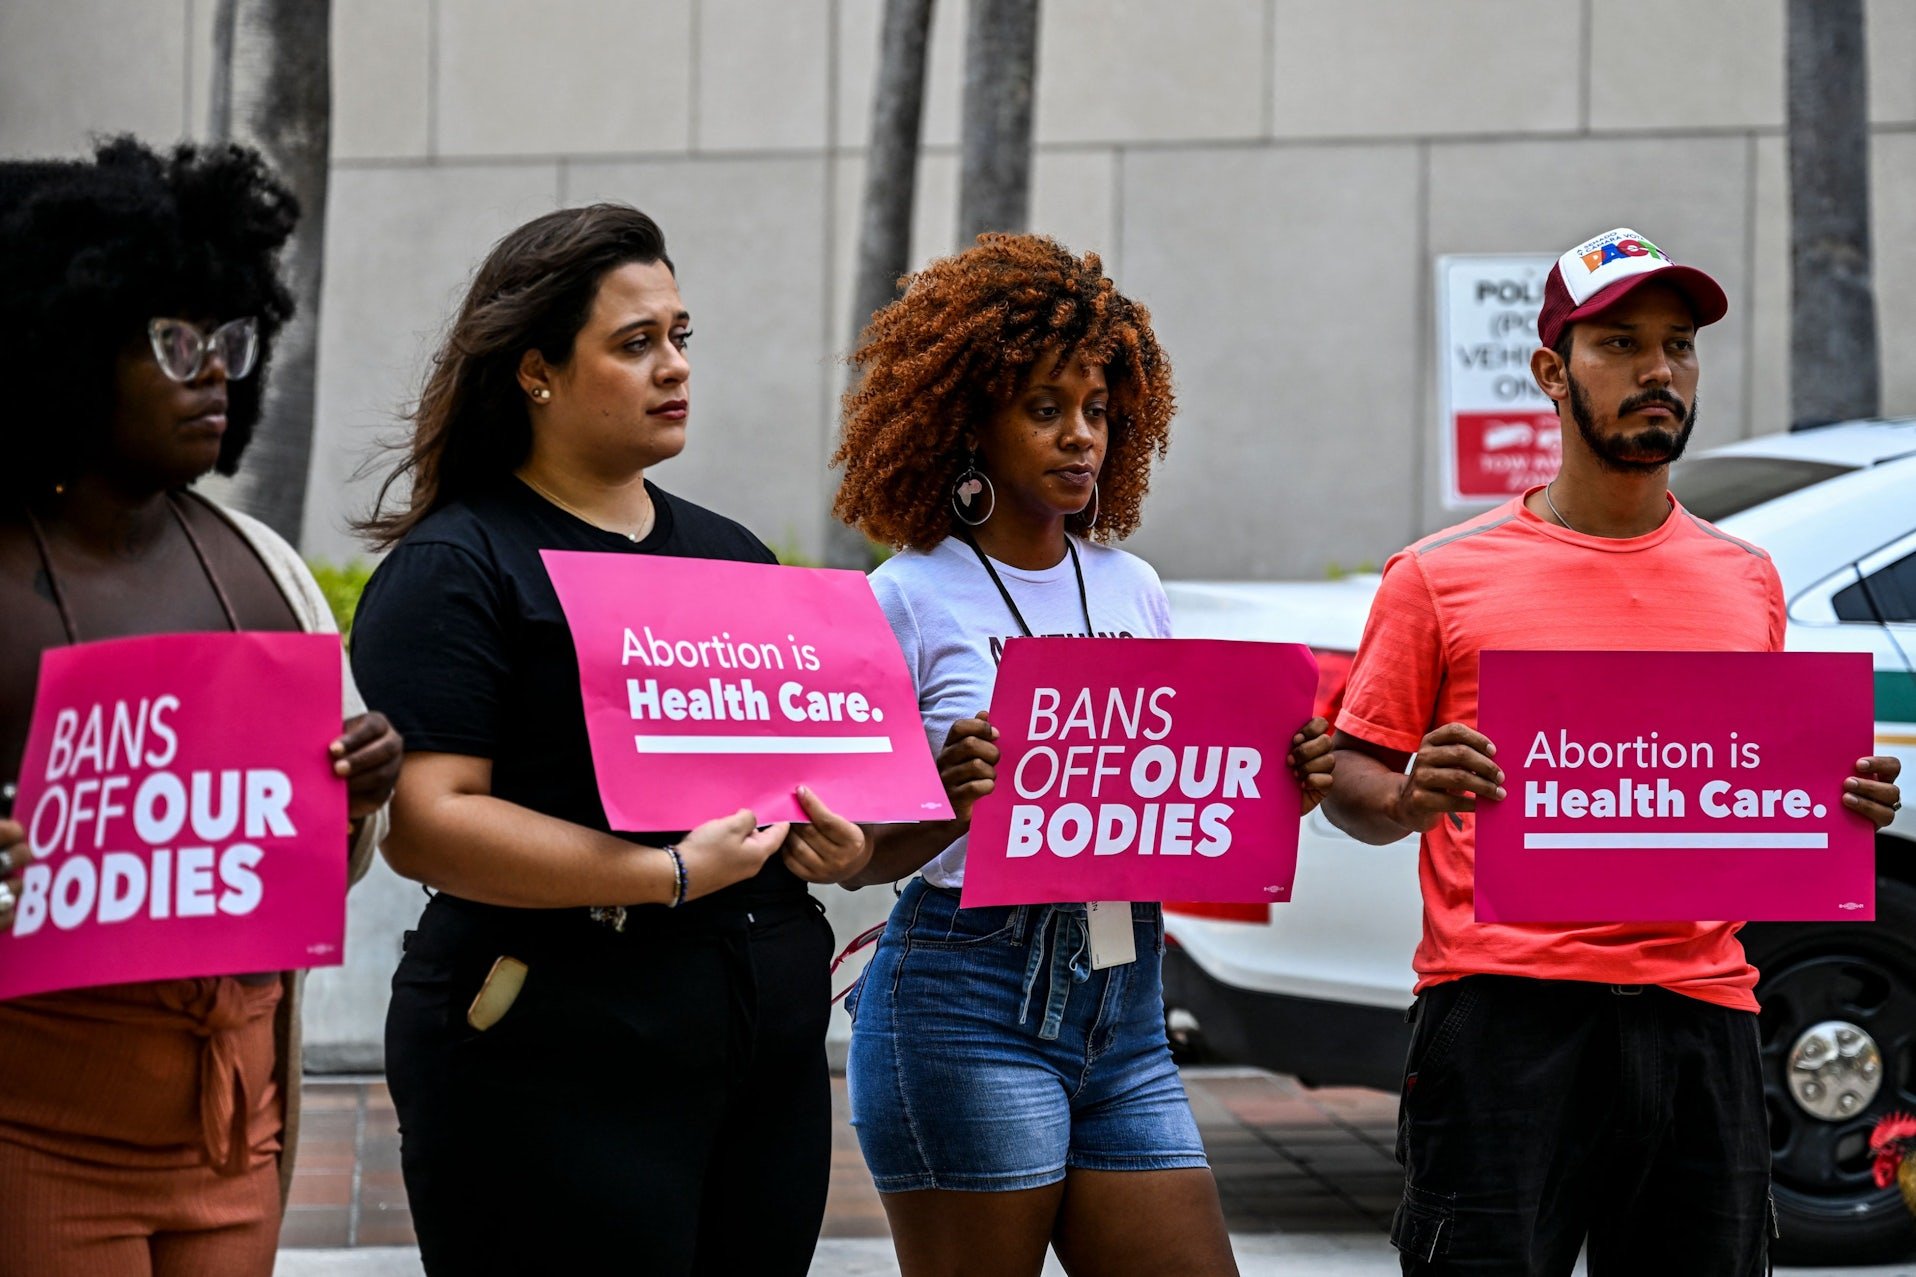 Peaceful demonstrators holding up signs saying "Abortion is health care" adn "bans off our bodies."